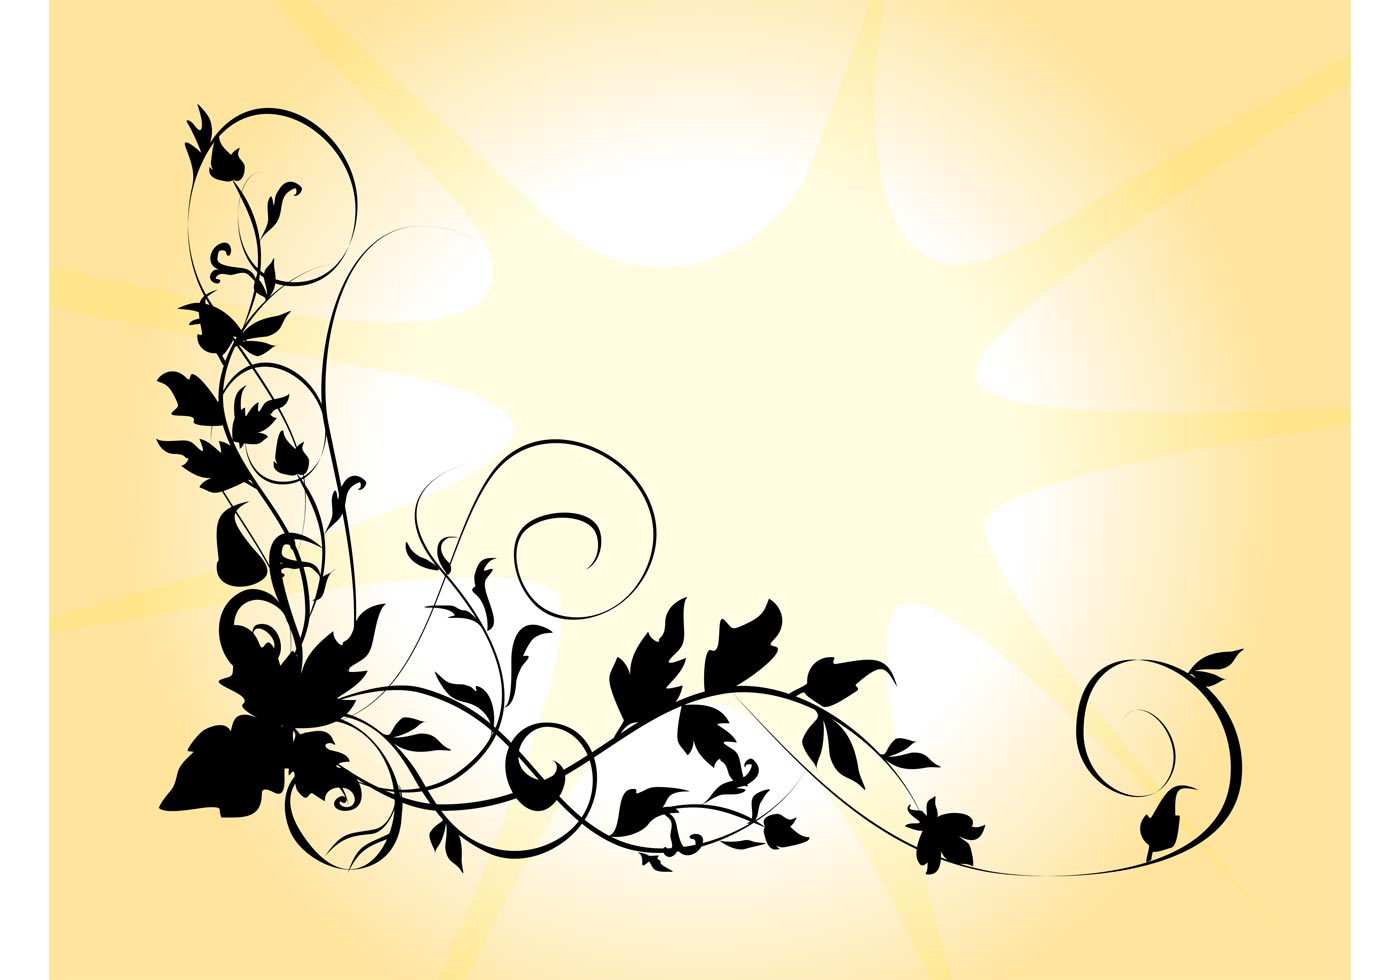 Download Silhouette Flower - Download Free Vector Art, Stock ...